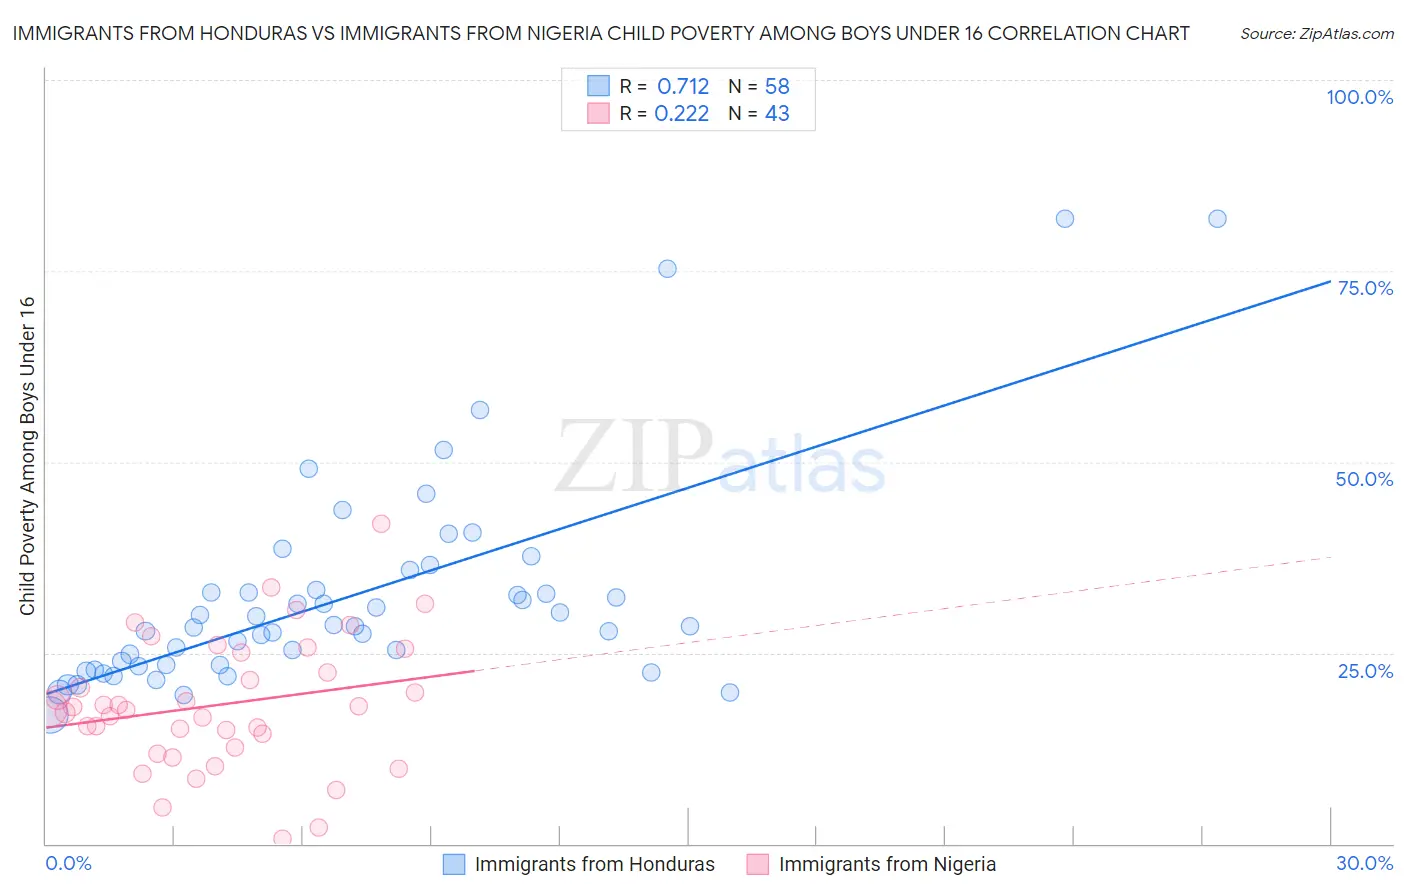 Immigrants from Honduras vs Immigrants from Nigeria Child Poverty Among Boys Under 16